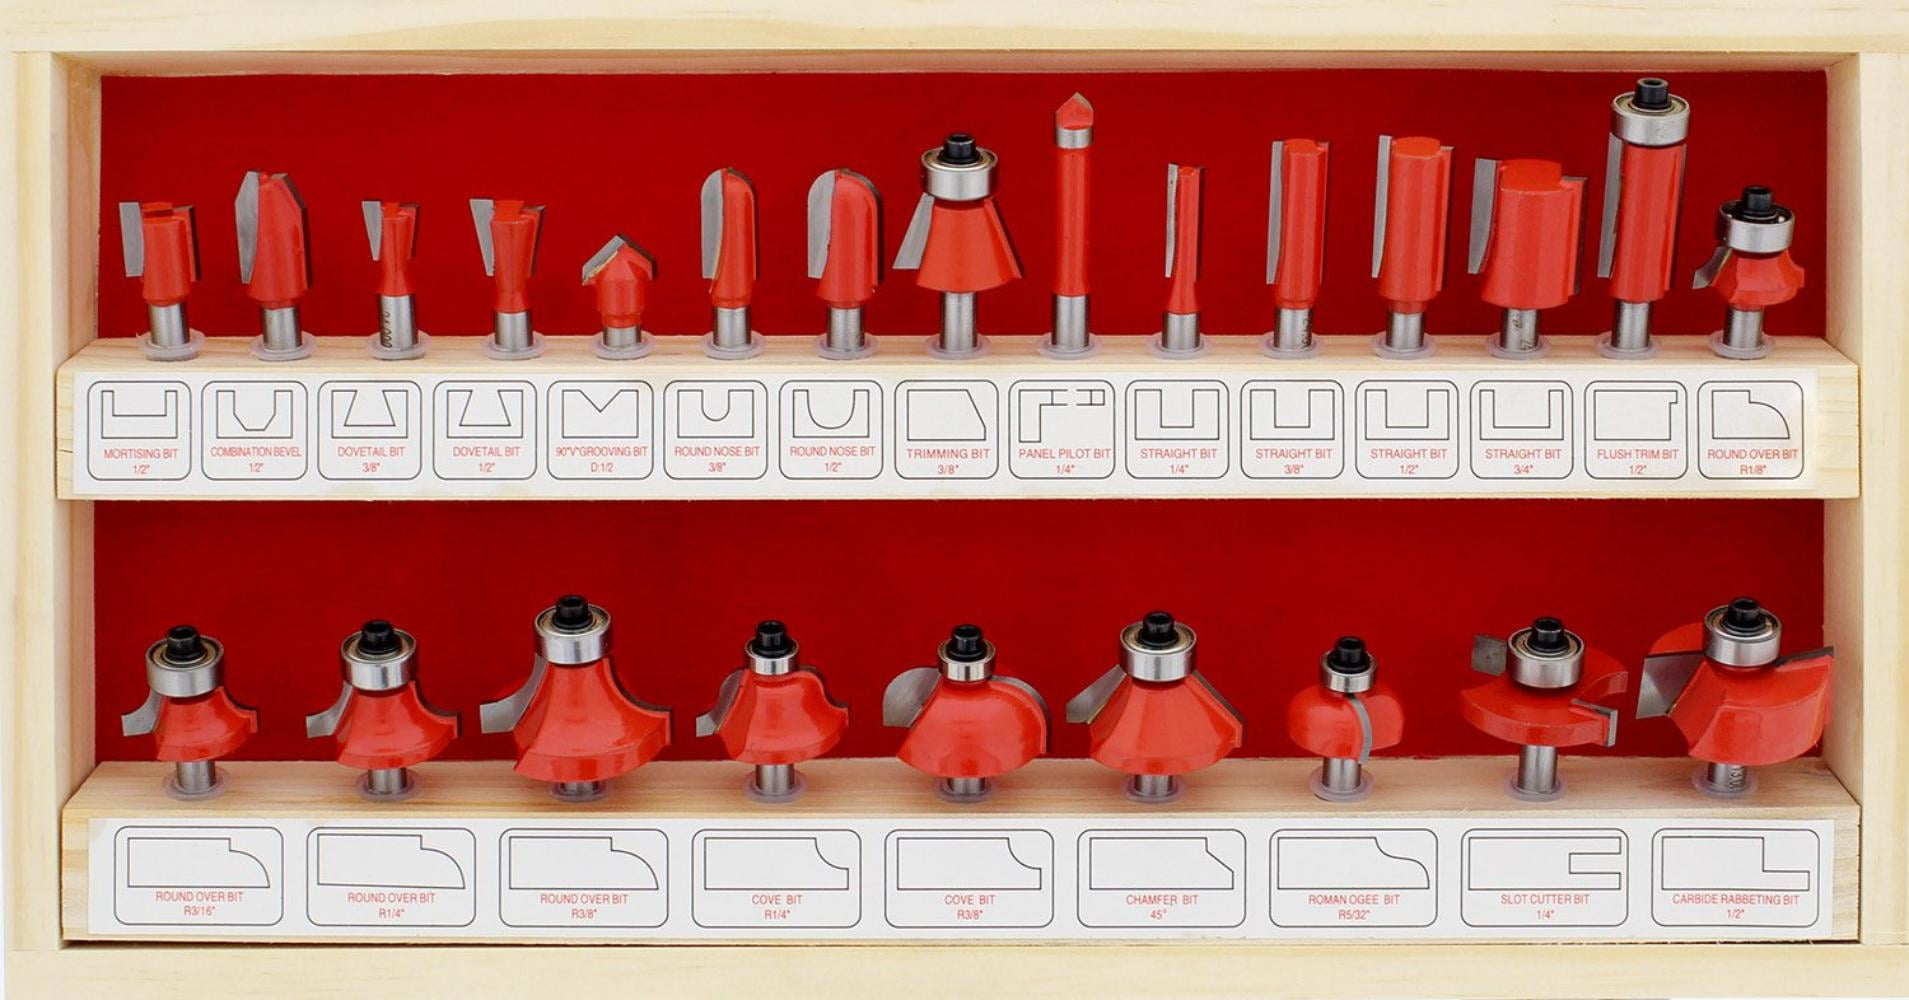 for Beginners to Commercial Users 24 Piece Router Set 1/4” Inch Shanks ABN Tungsten Carbide Router Bit Set 